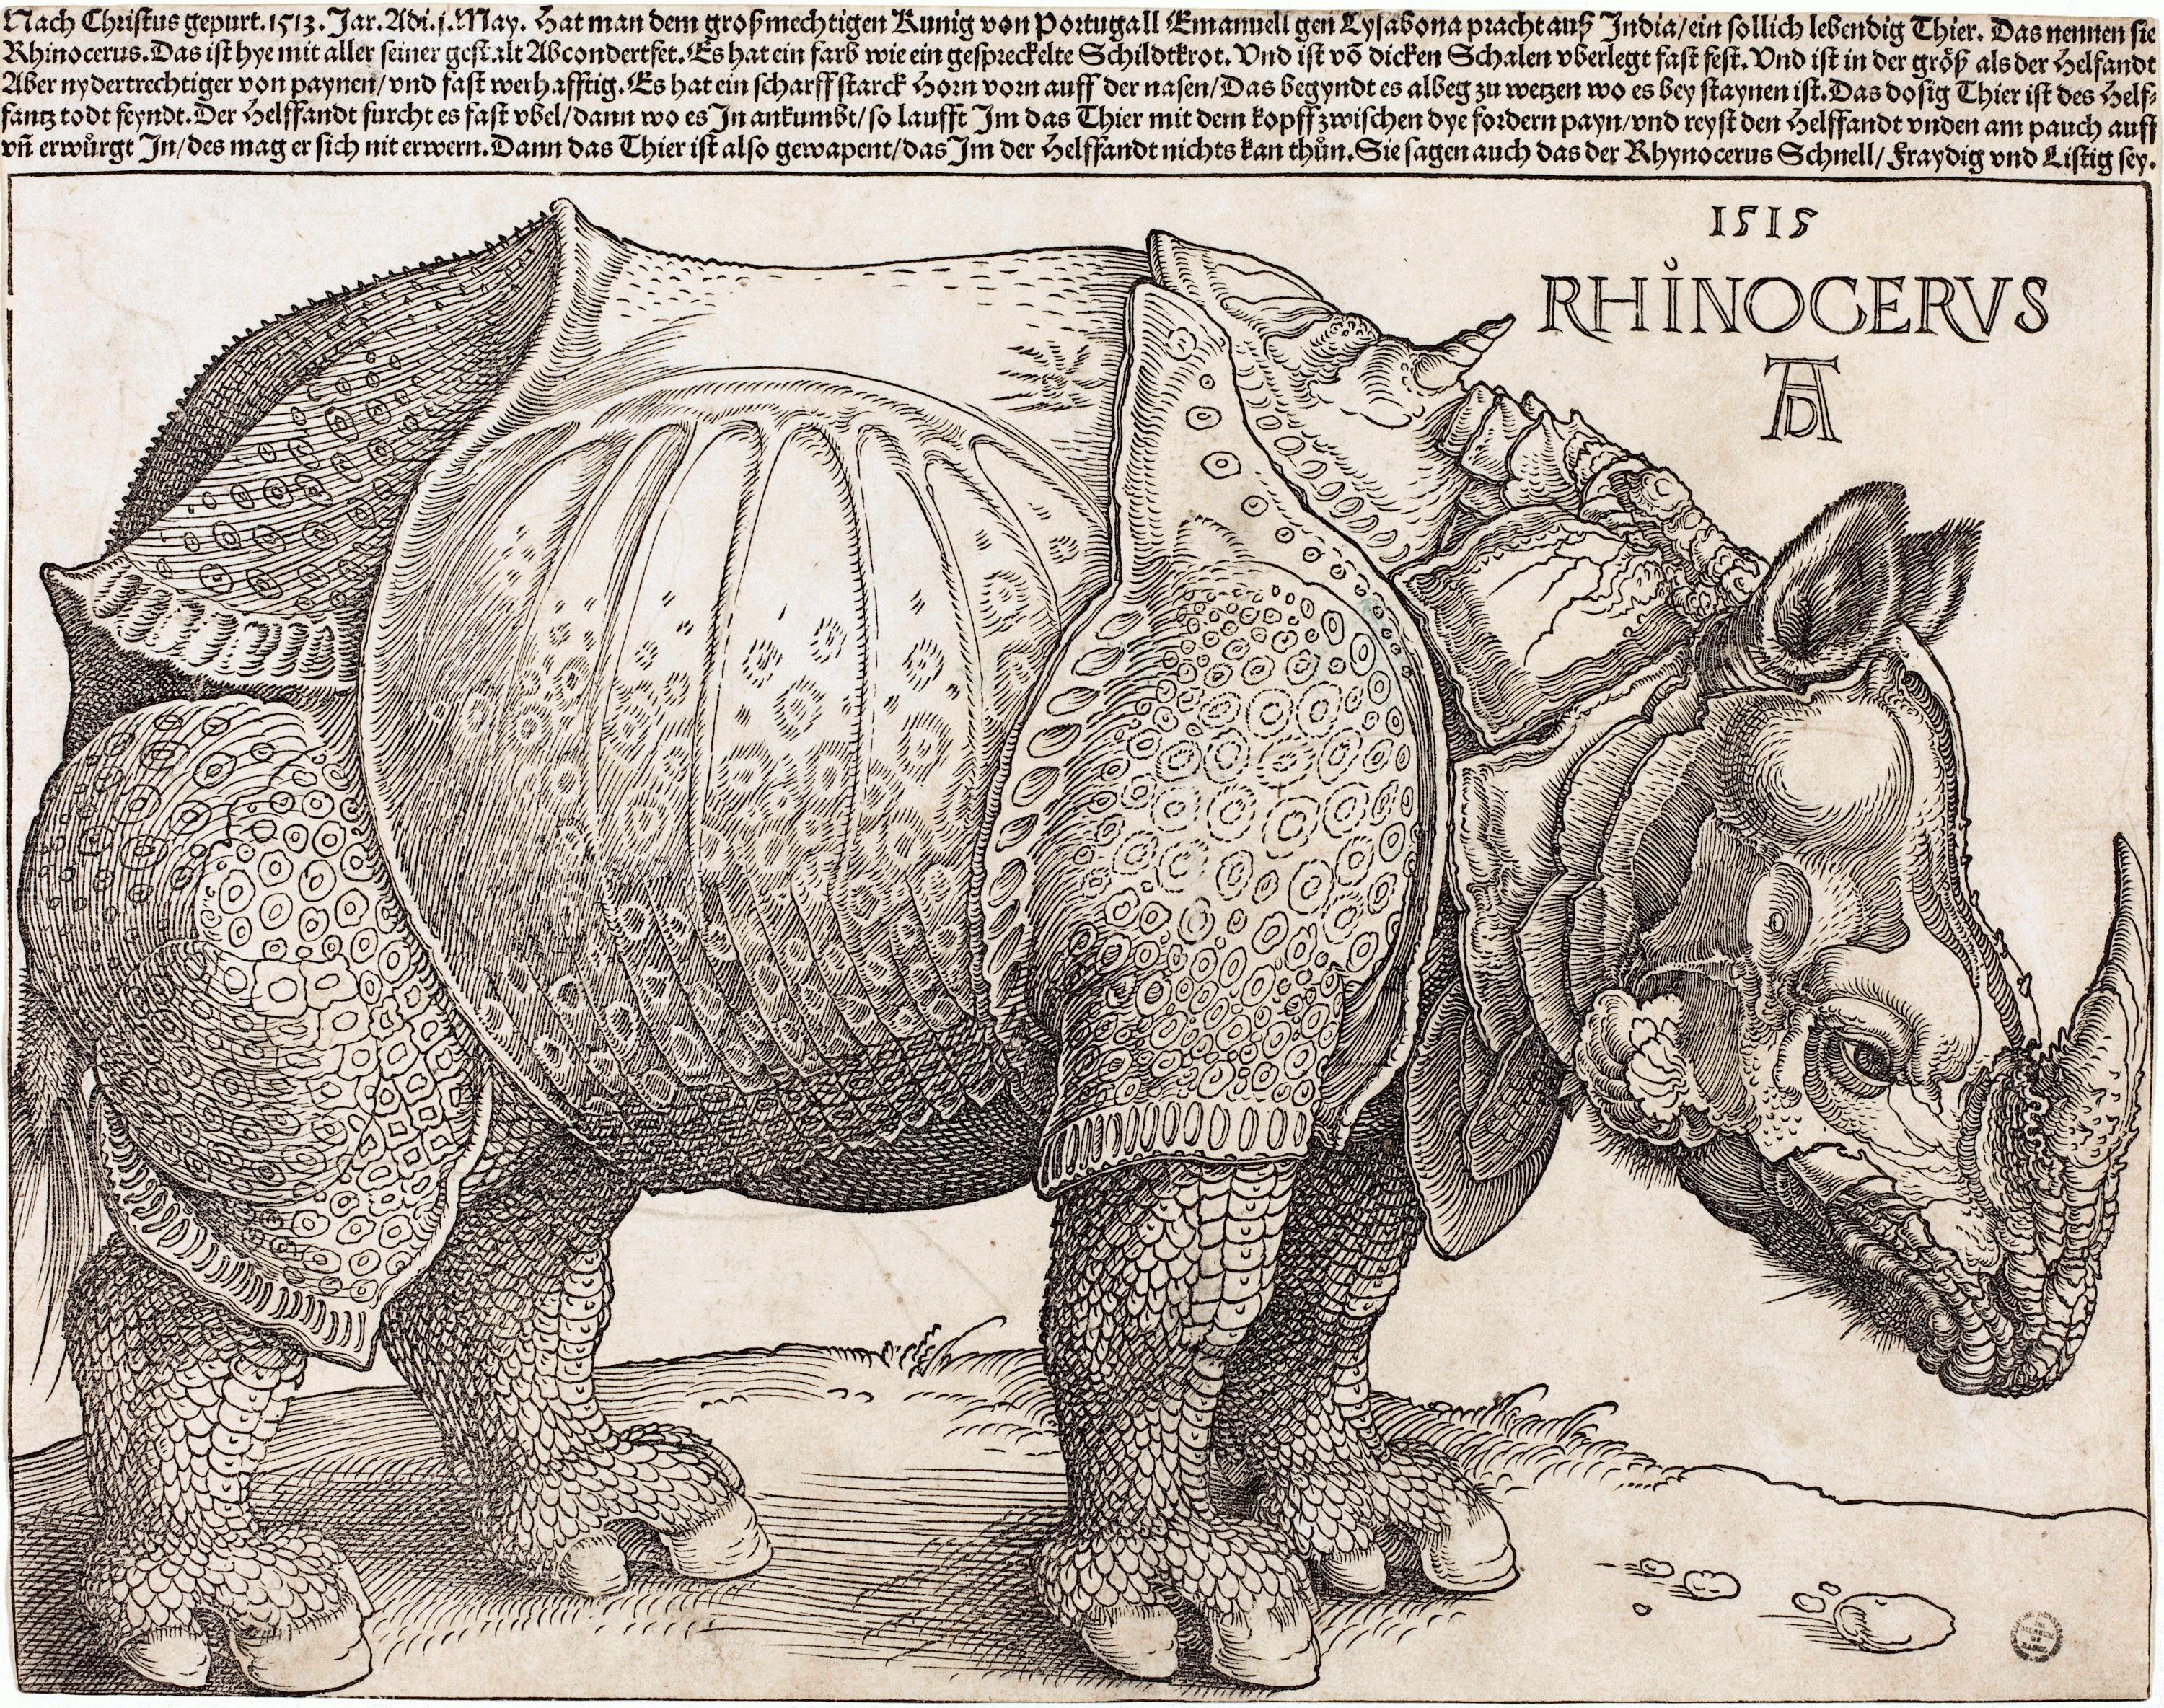 Albrecht Dürer's 1515 print, 'Rhinoceros'. A black-and-sepia woodcut print, it shows a rhino with fanciful armor, extra horns, and scales.